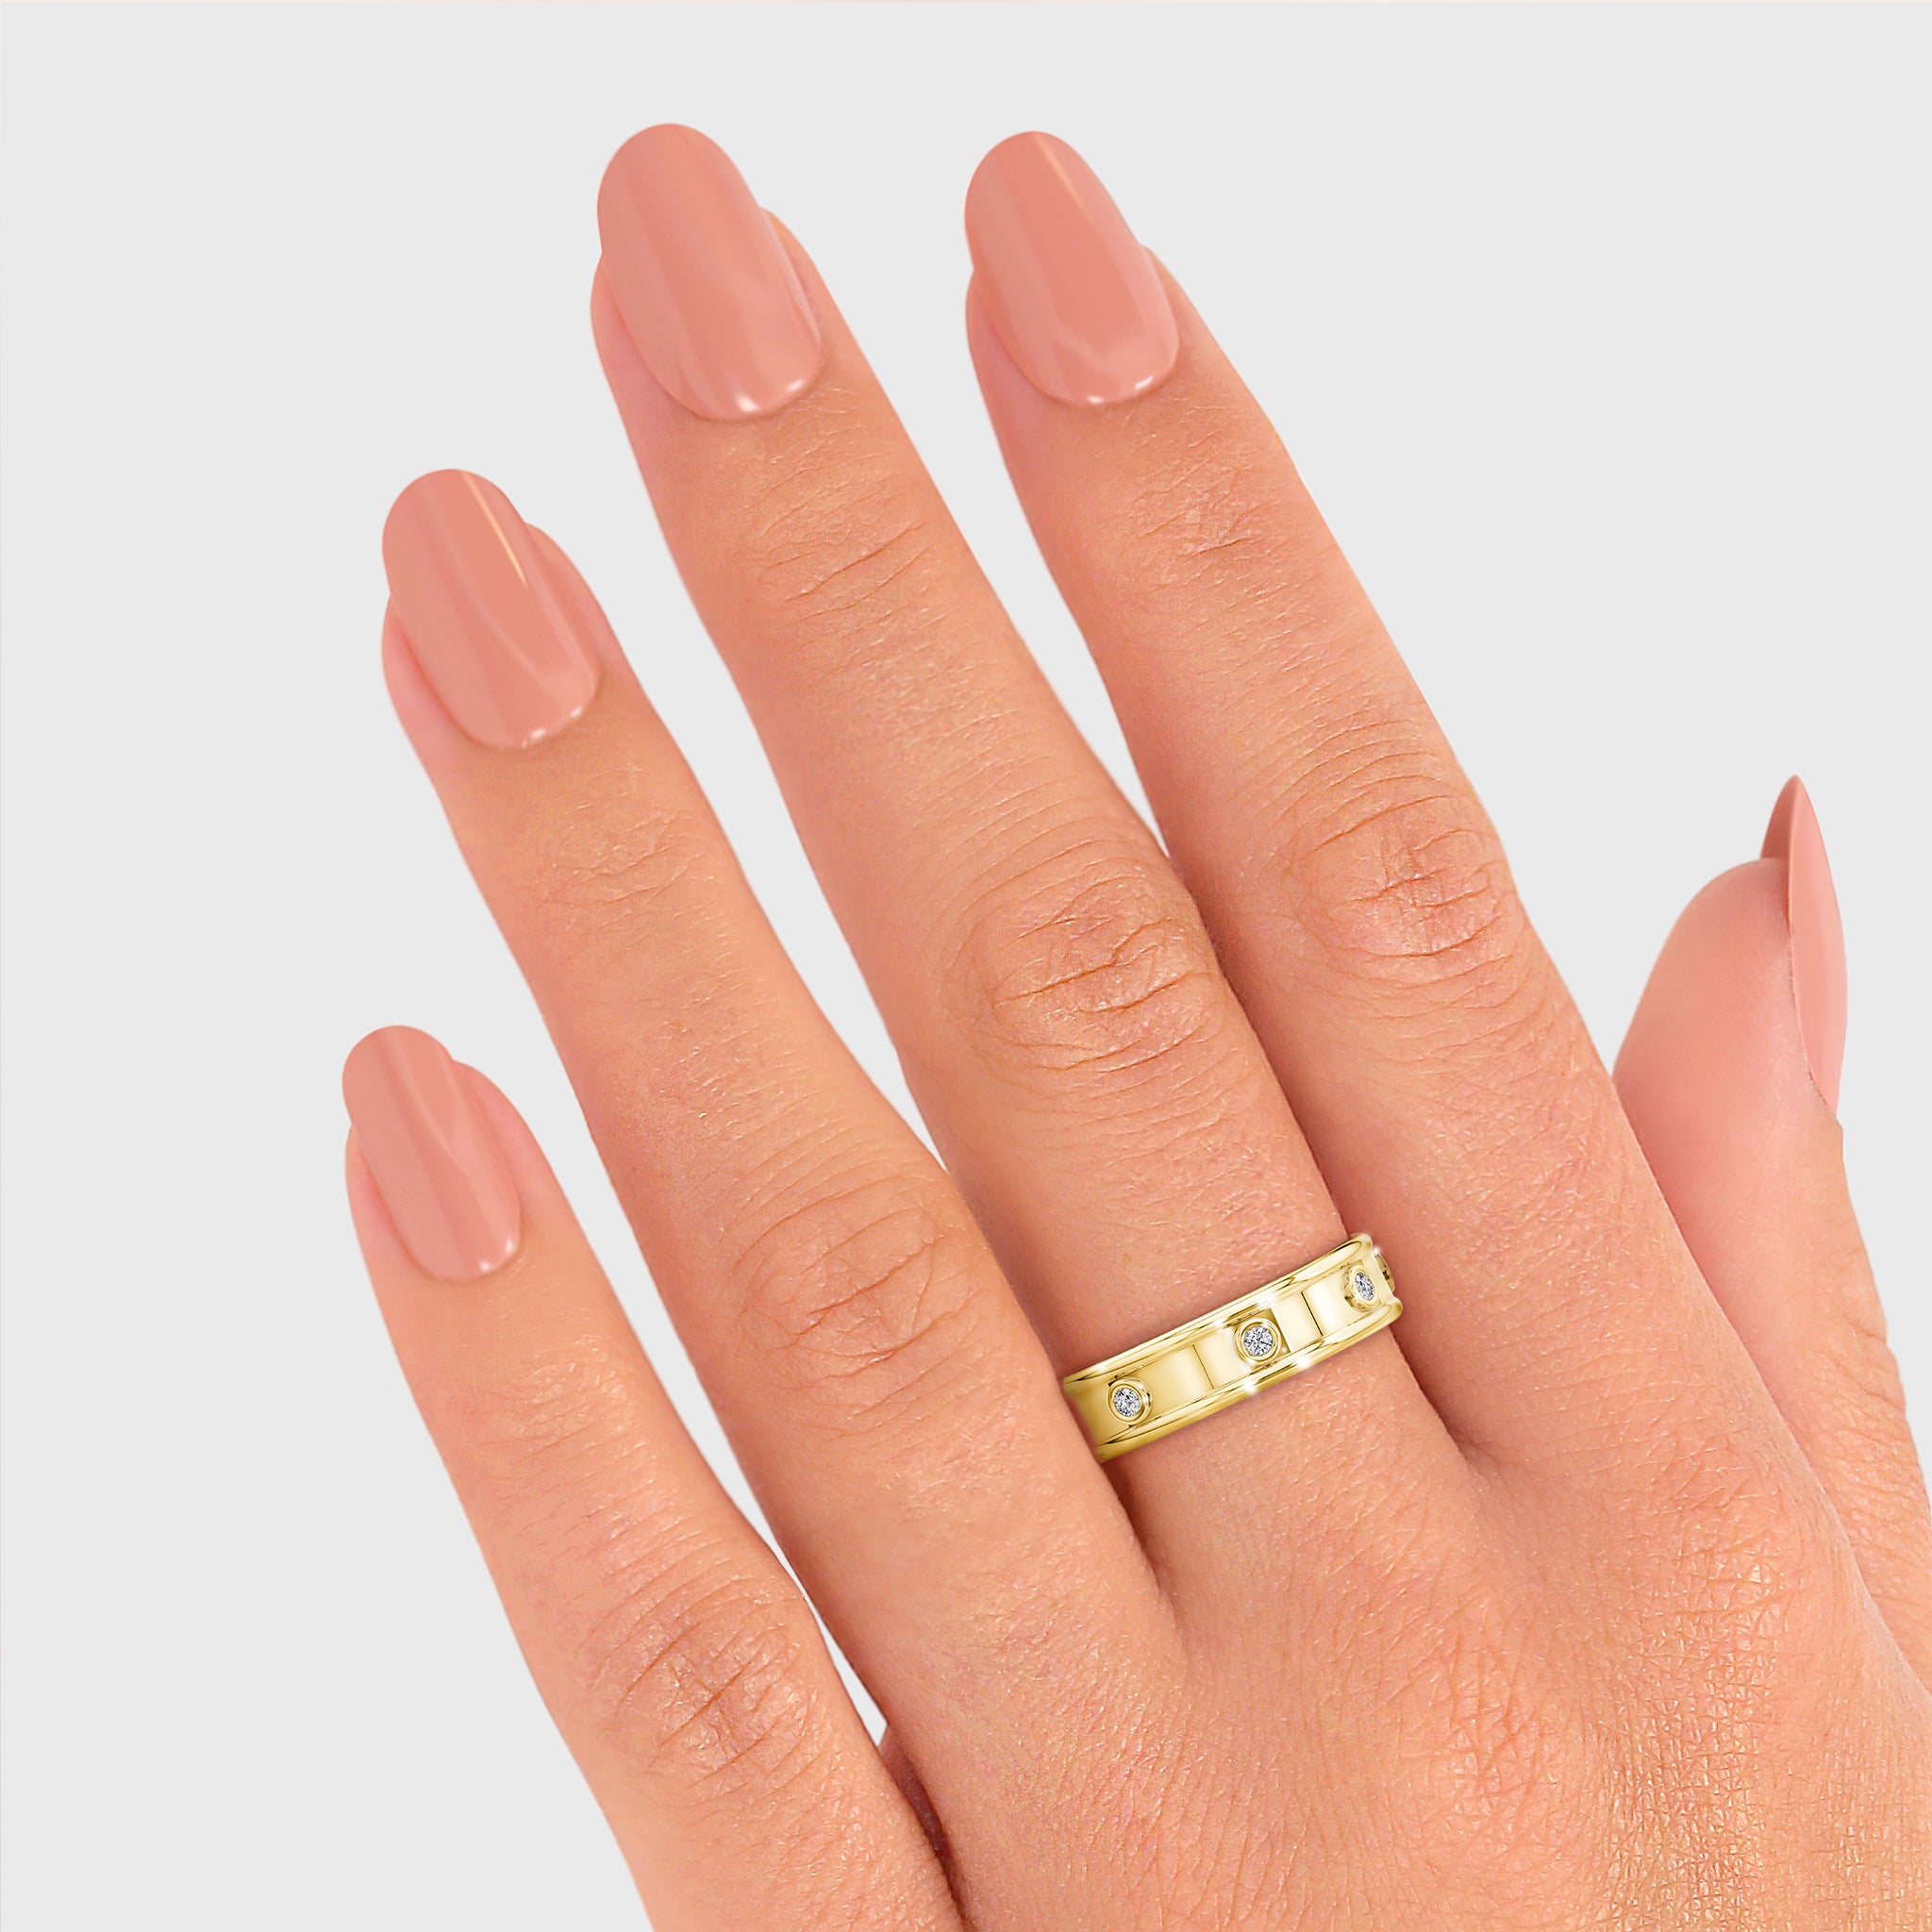 Shimansky - Women Wearing the Caesar Classic Raised Diamond Ring 0.20ct crafted in 18K Yellow Gold